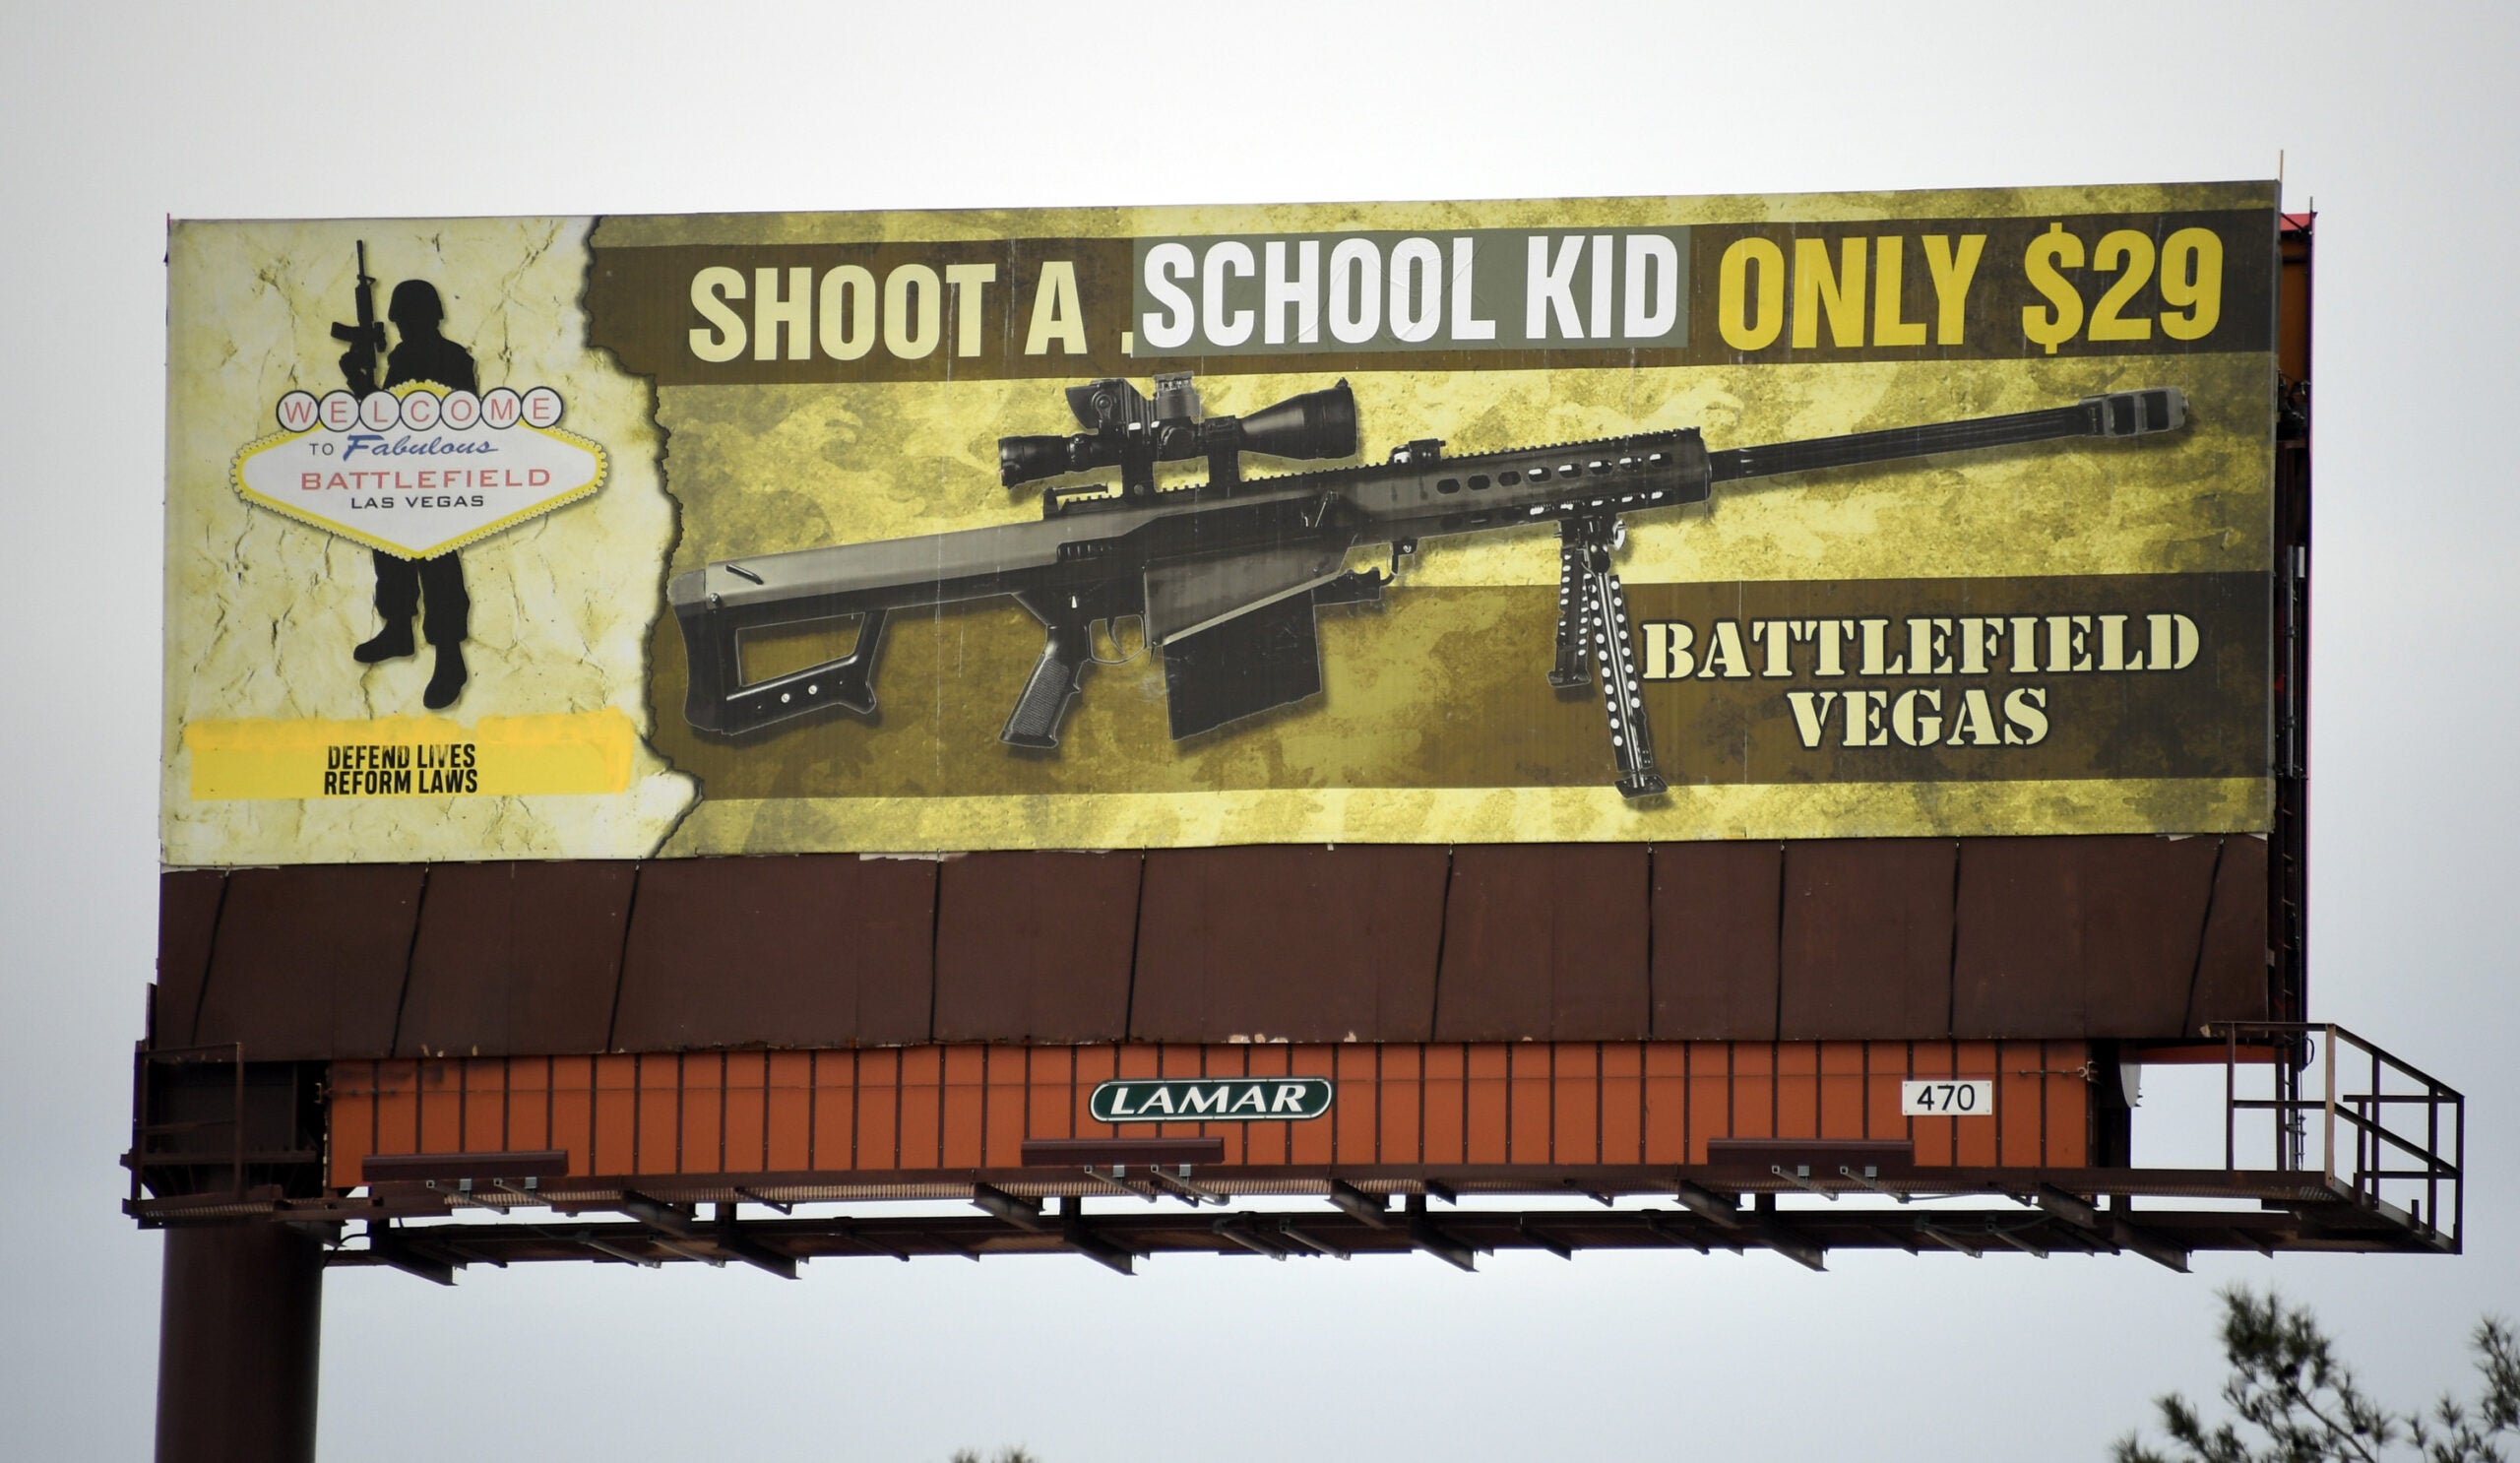 LAS VEGAS, NV - MARCH 01: A billboard poster for the Battlefield Vegas shooting range is shown after it was vandalized on March 1, 2018 in Las Vegas, Nevada. The activist art collective Indecline took responsibility for putting the words "SCHOOL KID" over the words ".50 CALIBER" on the sign as well as "DEFEND LIVES REFORM LAWS." Indecline released a statement saying that the protest piece is a response to American's obsession with gun culture and the government's ties with the NRA and called on politicians to work on reforming gun laws.  (Photo by Ethan Miller/Getty Images)